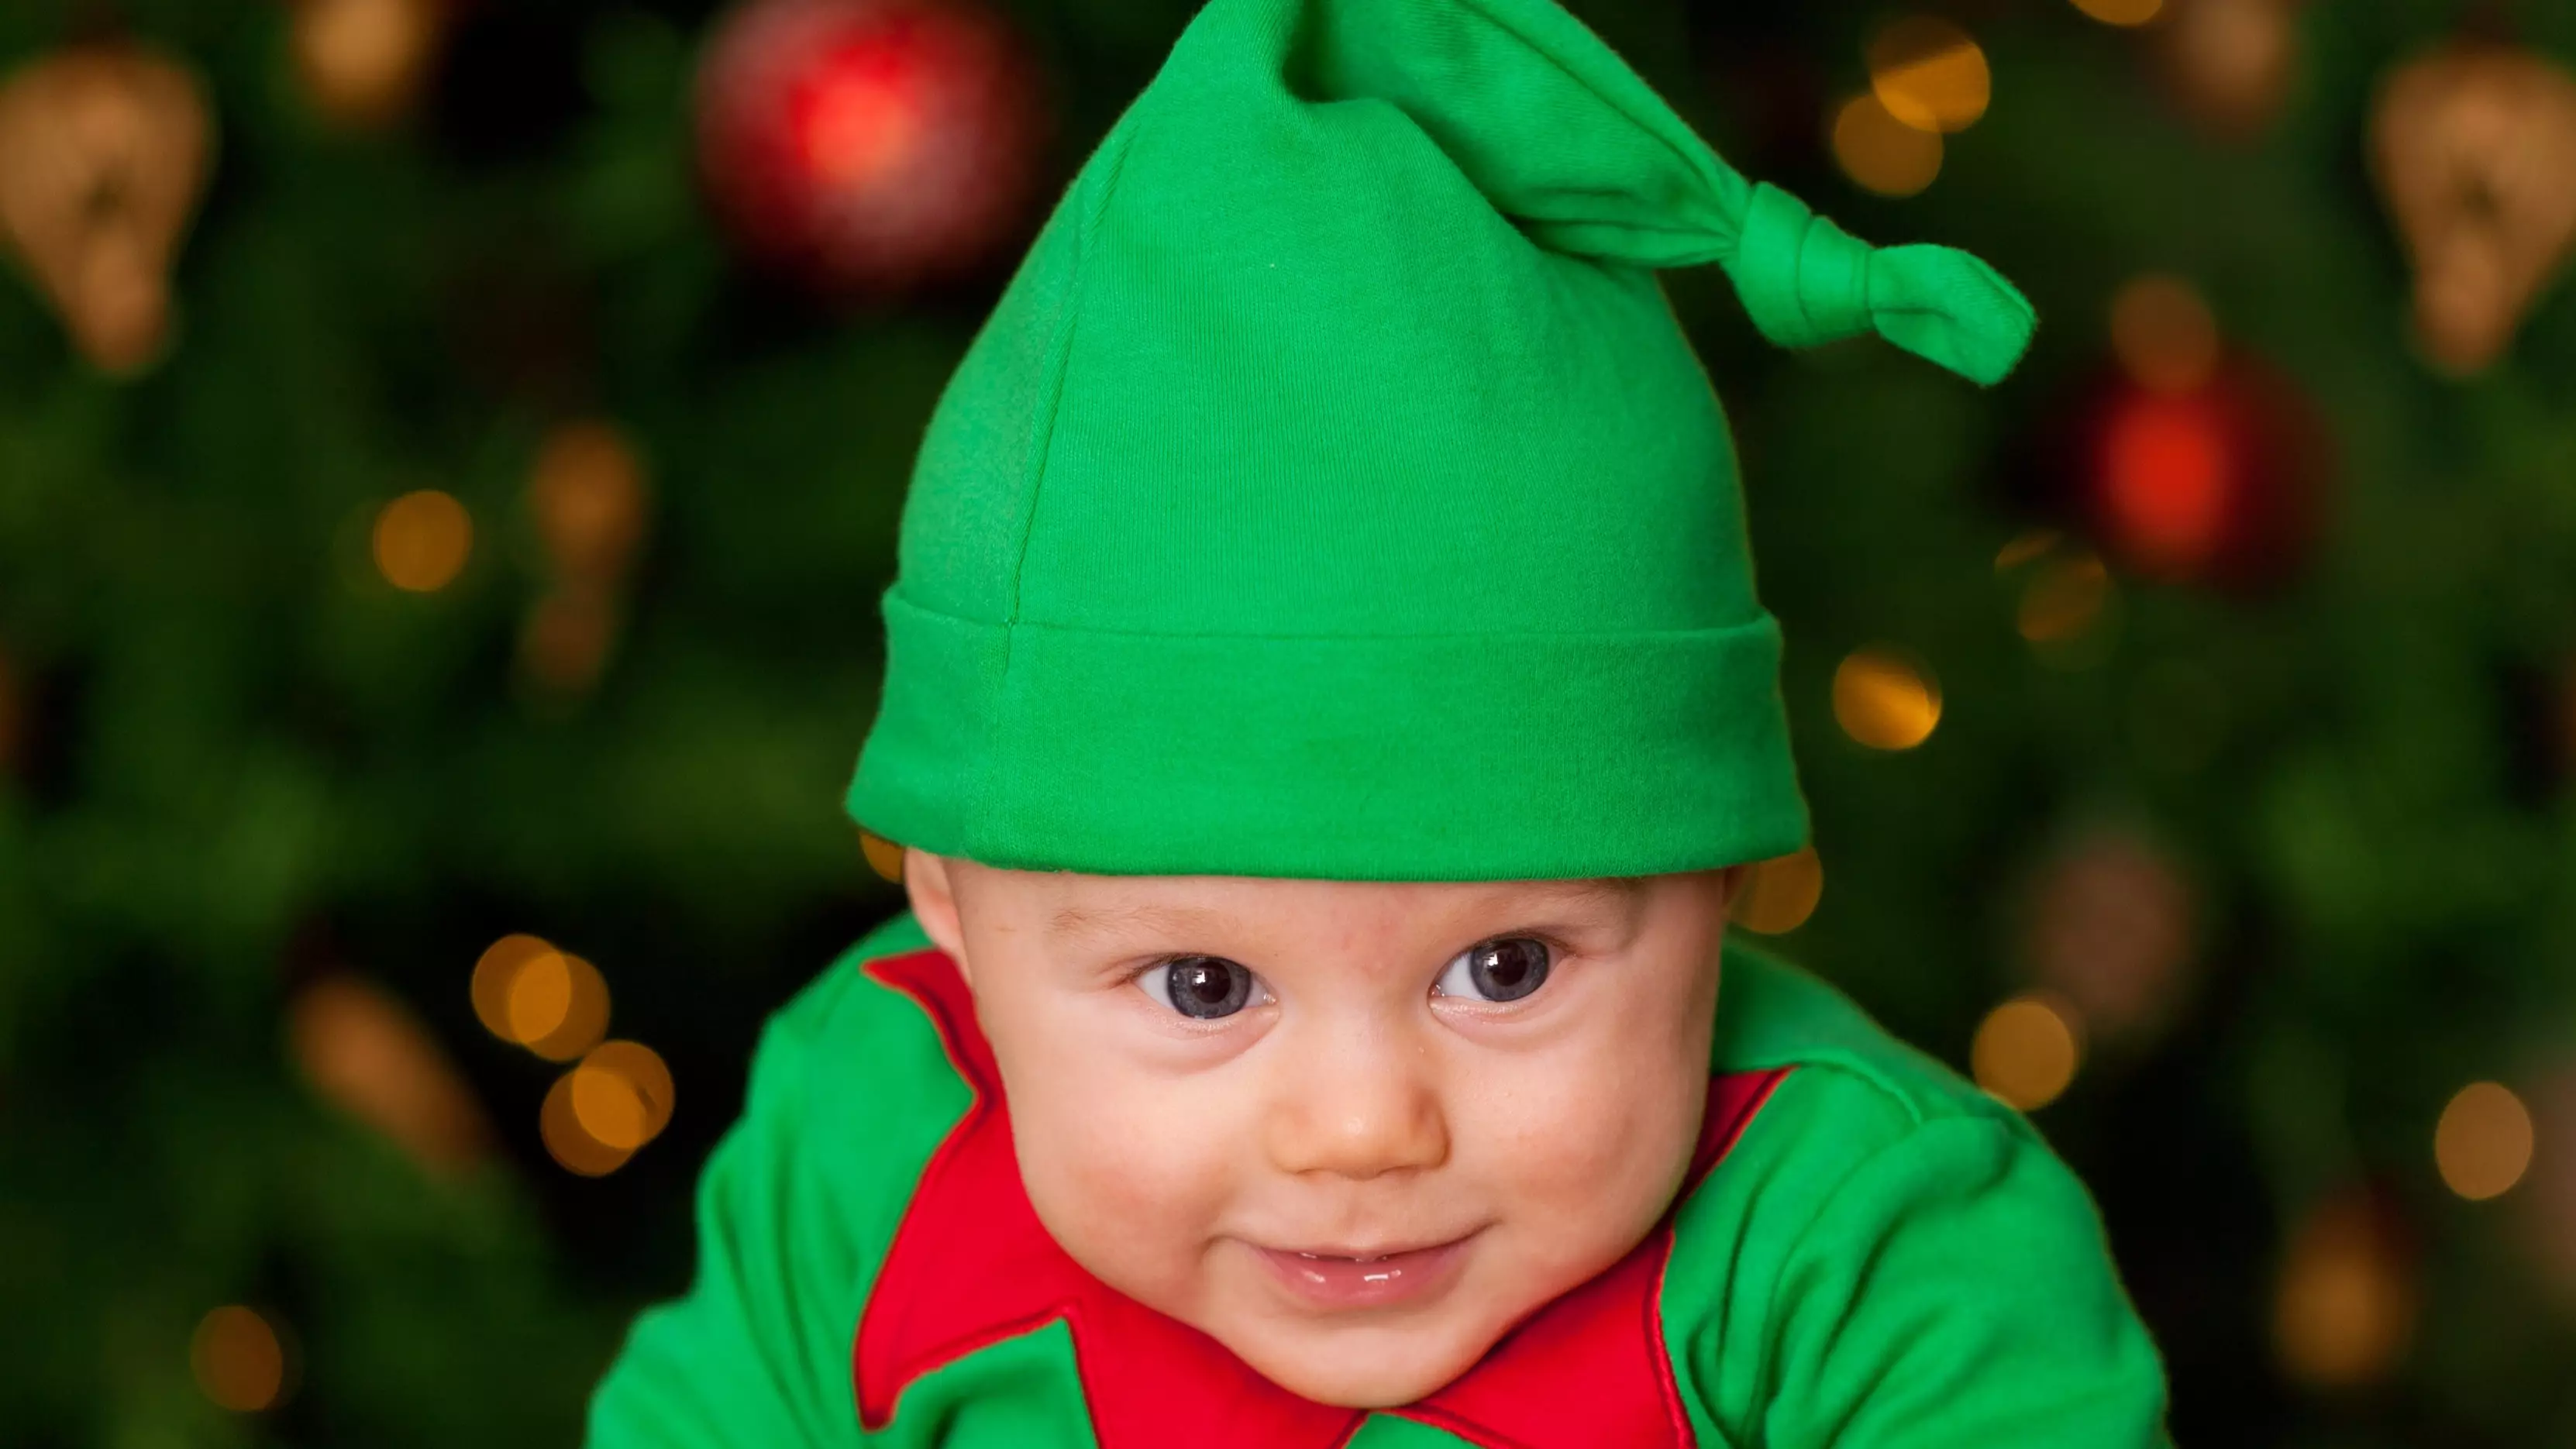 Baby Names That Will Most Likely End Up On Santa's Naughty List This Christmas